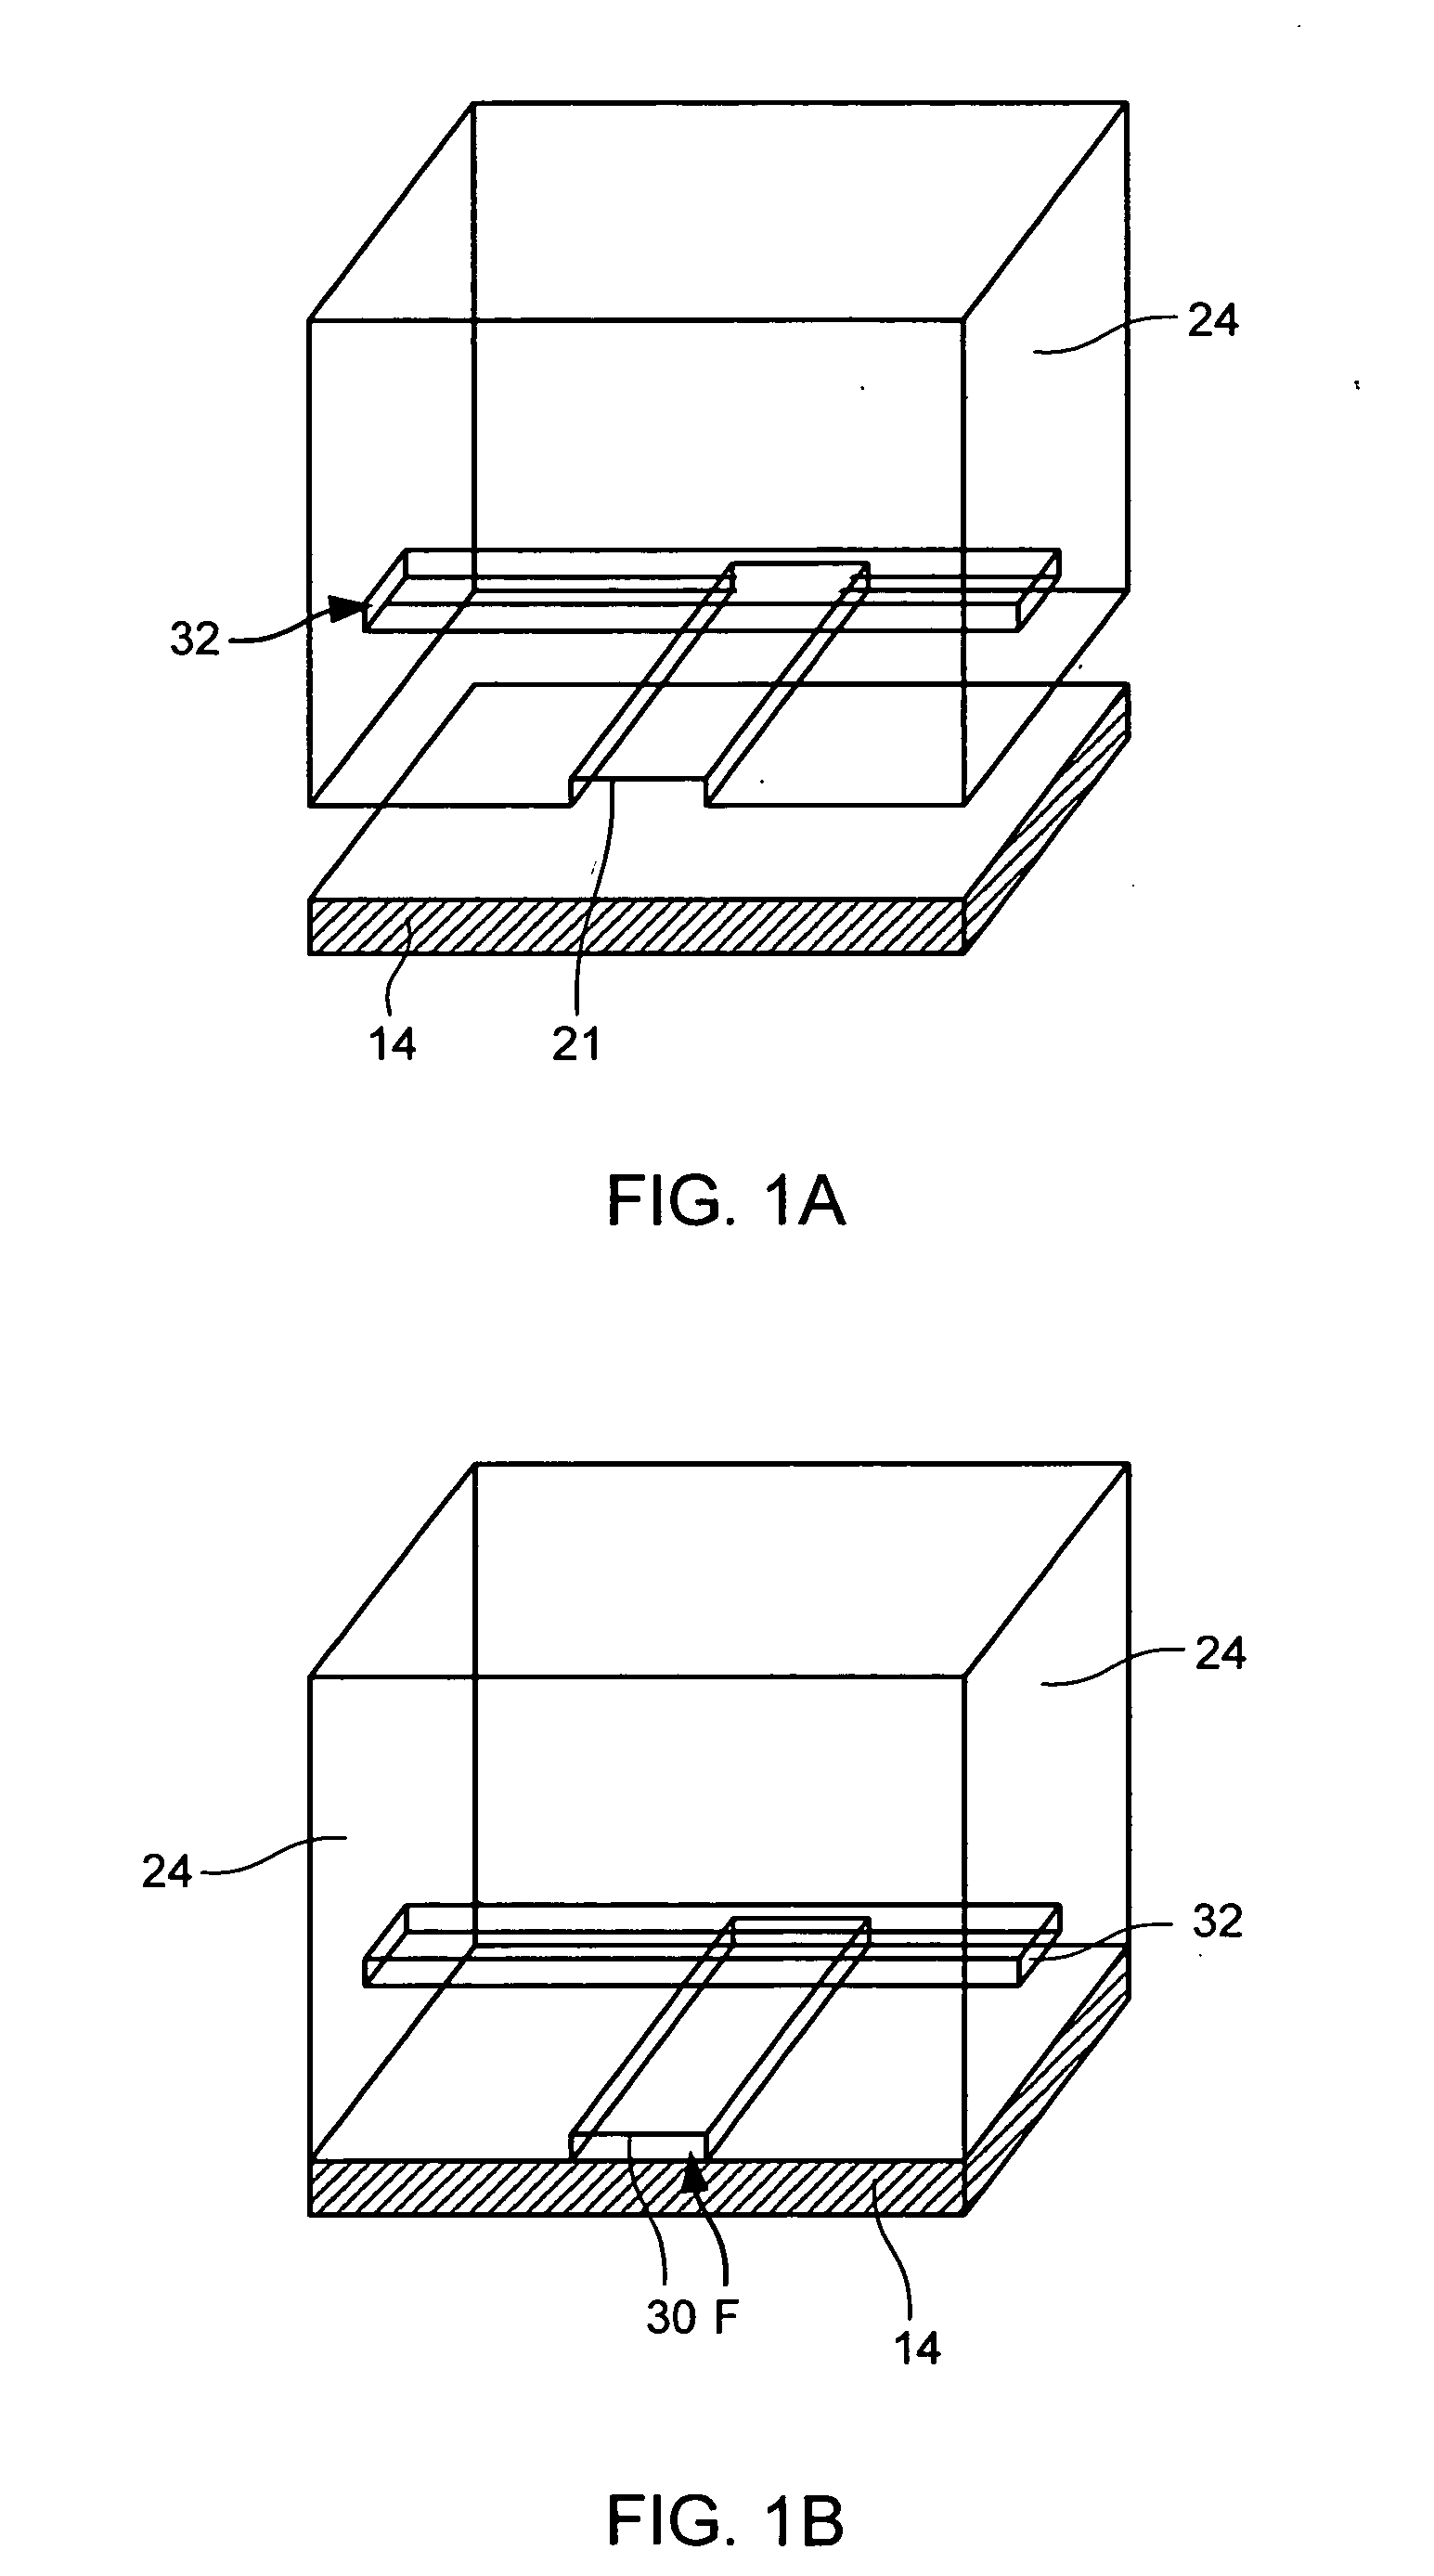 Recirculating fluidic network and methods for using the same